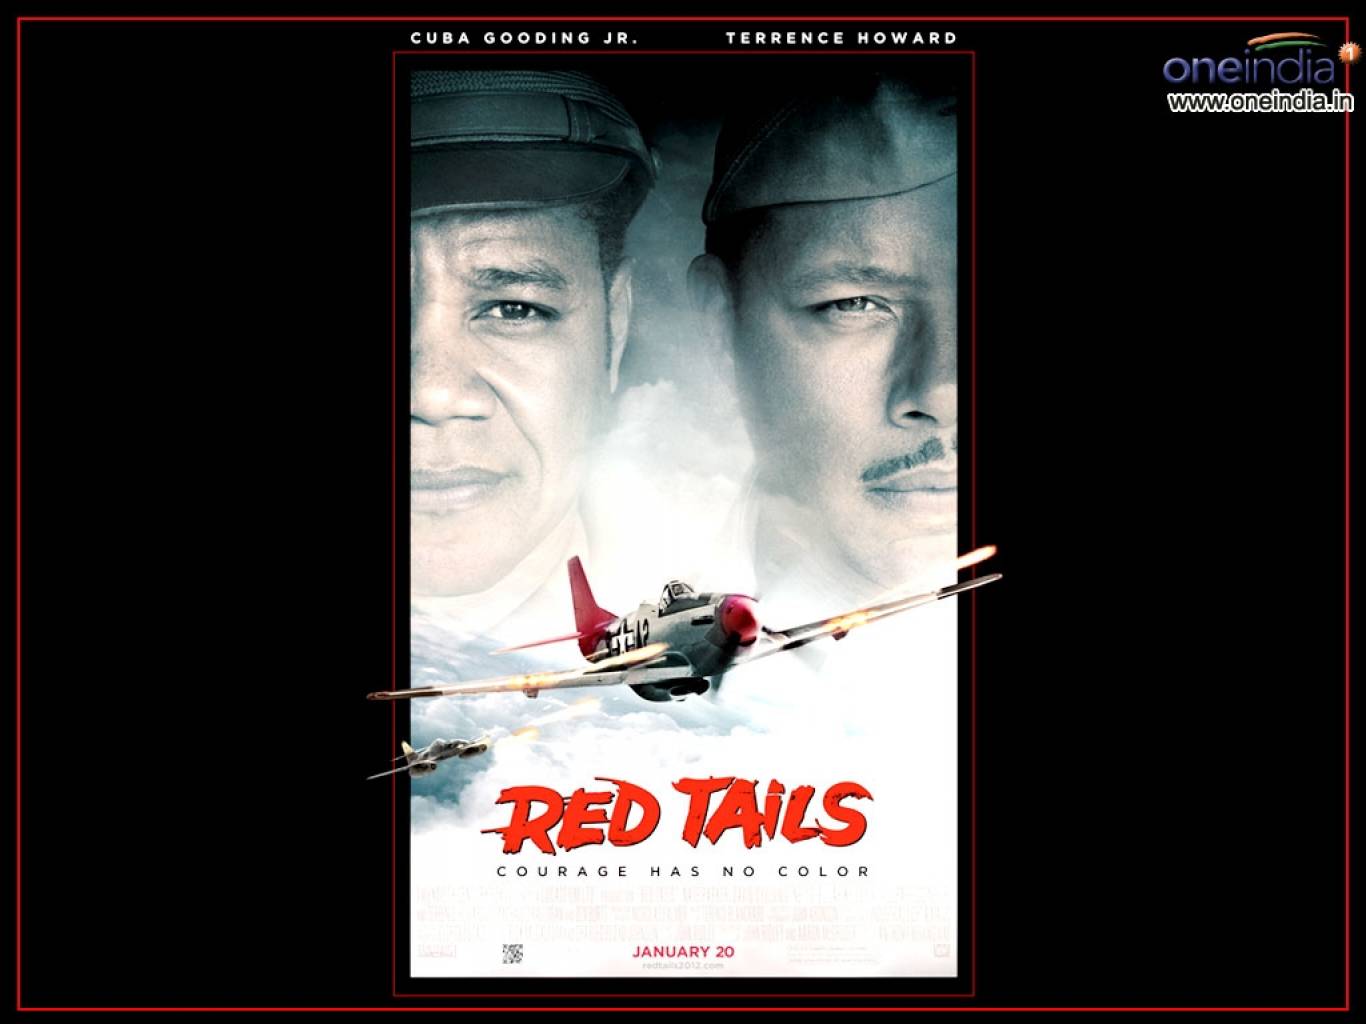 Red Tails Movie HD Wallpaper. Red Tails HD Movie Wallpaper Free Download (1080p to 2K)